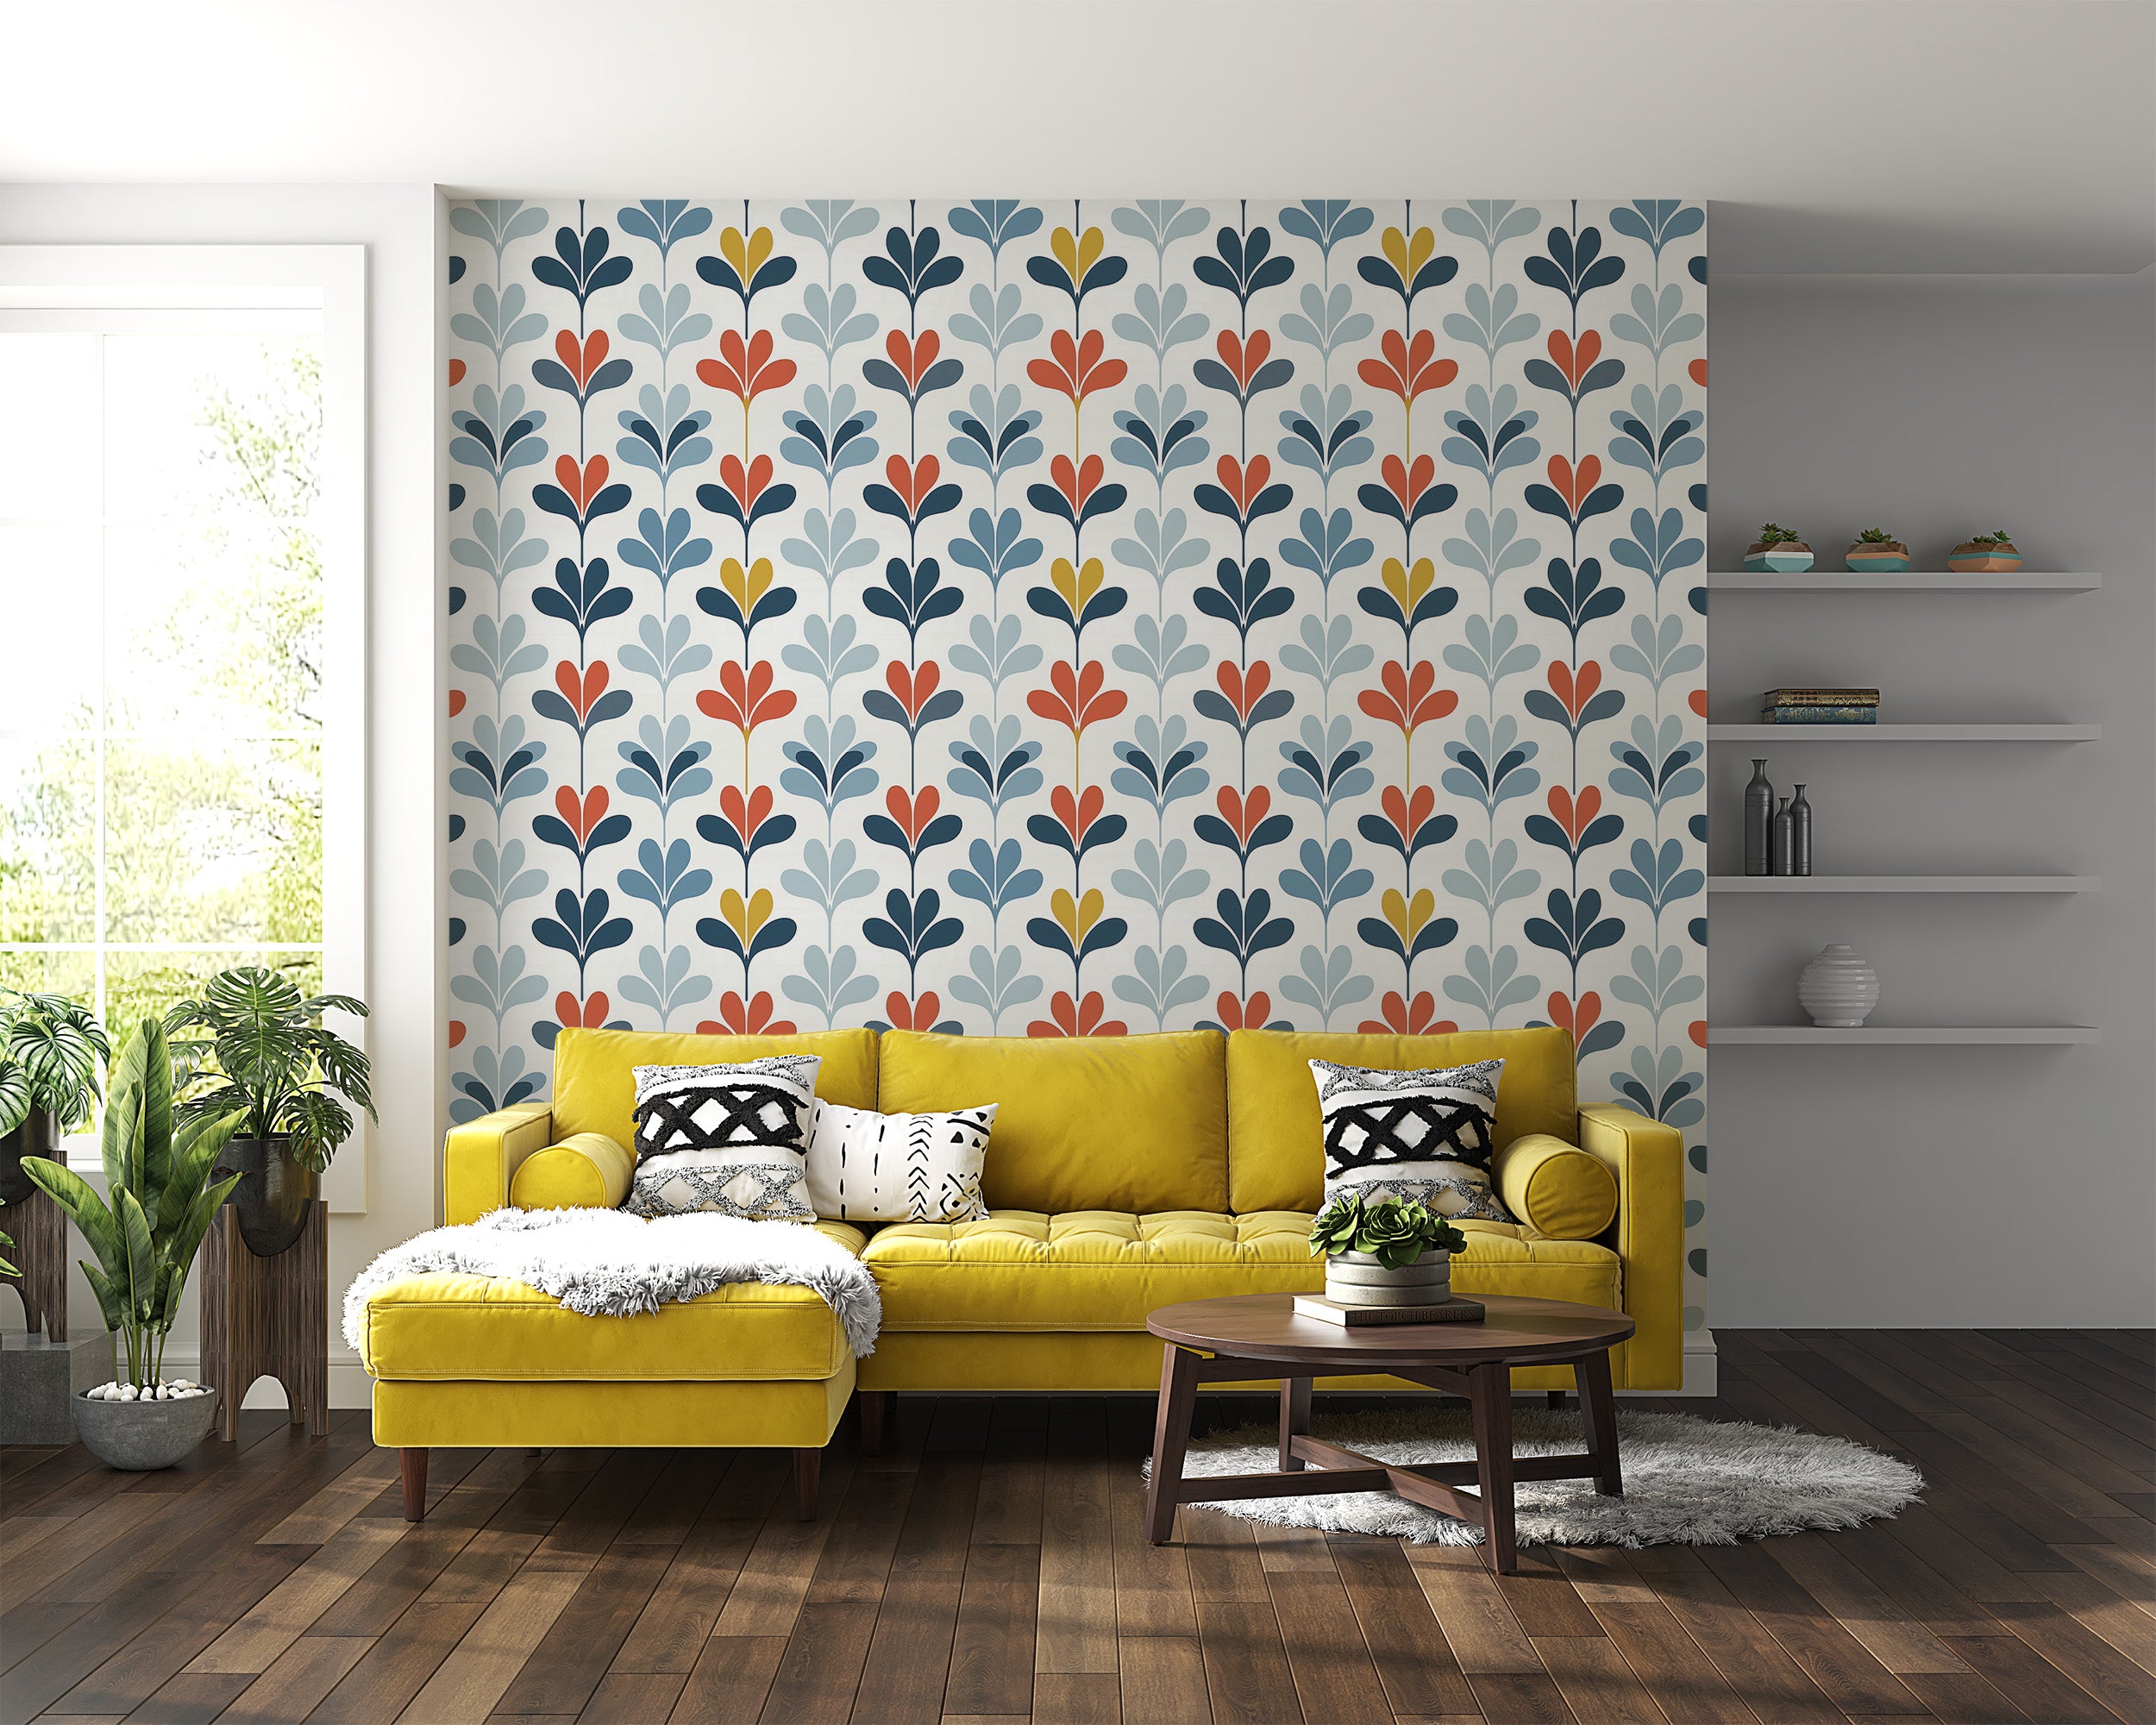 Colorful Leaves Wallpaper in Room Setting